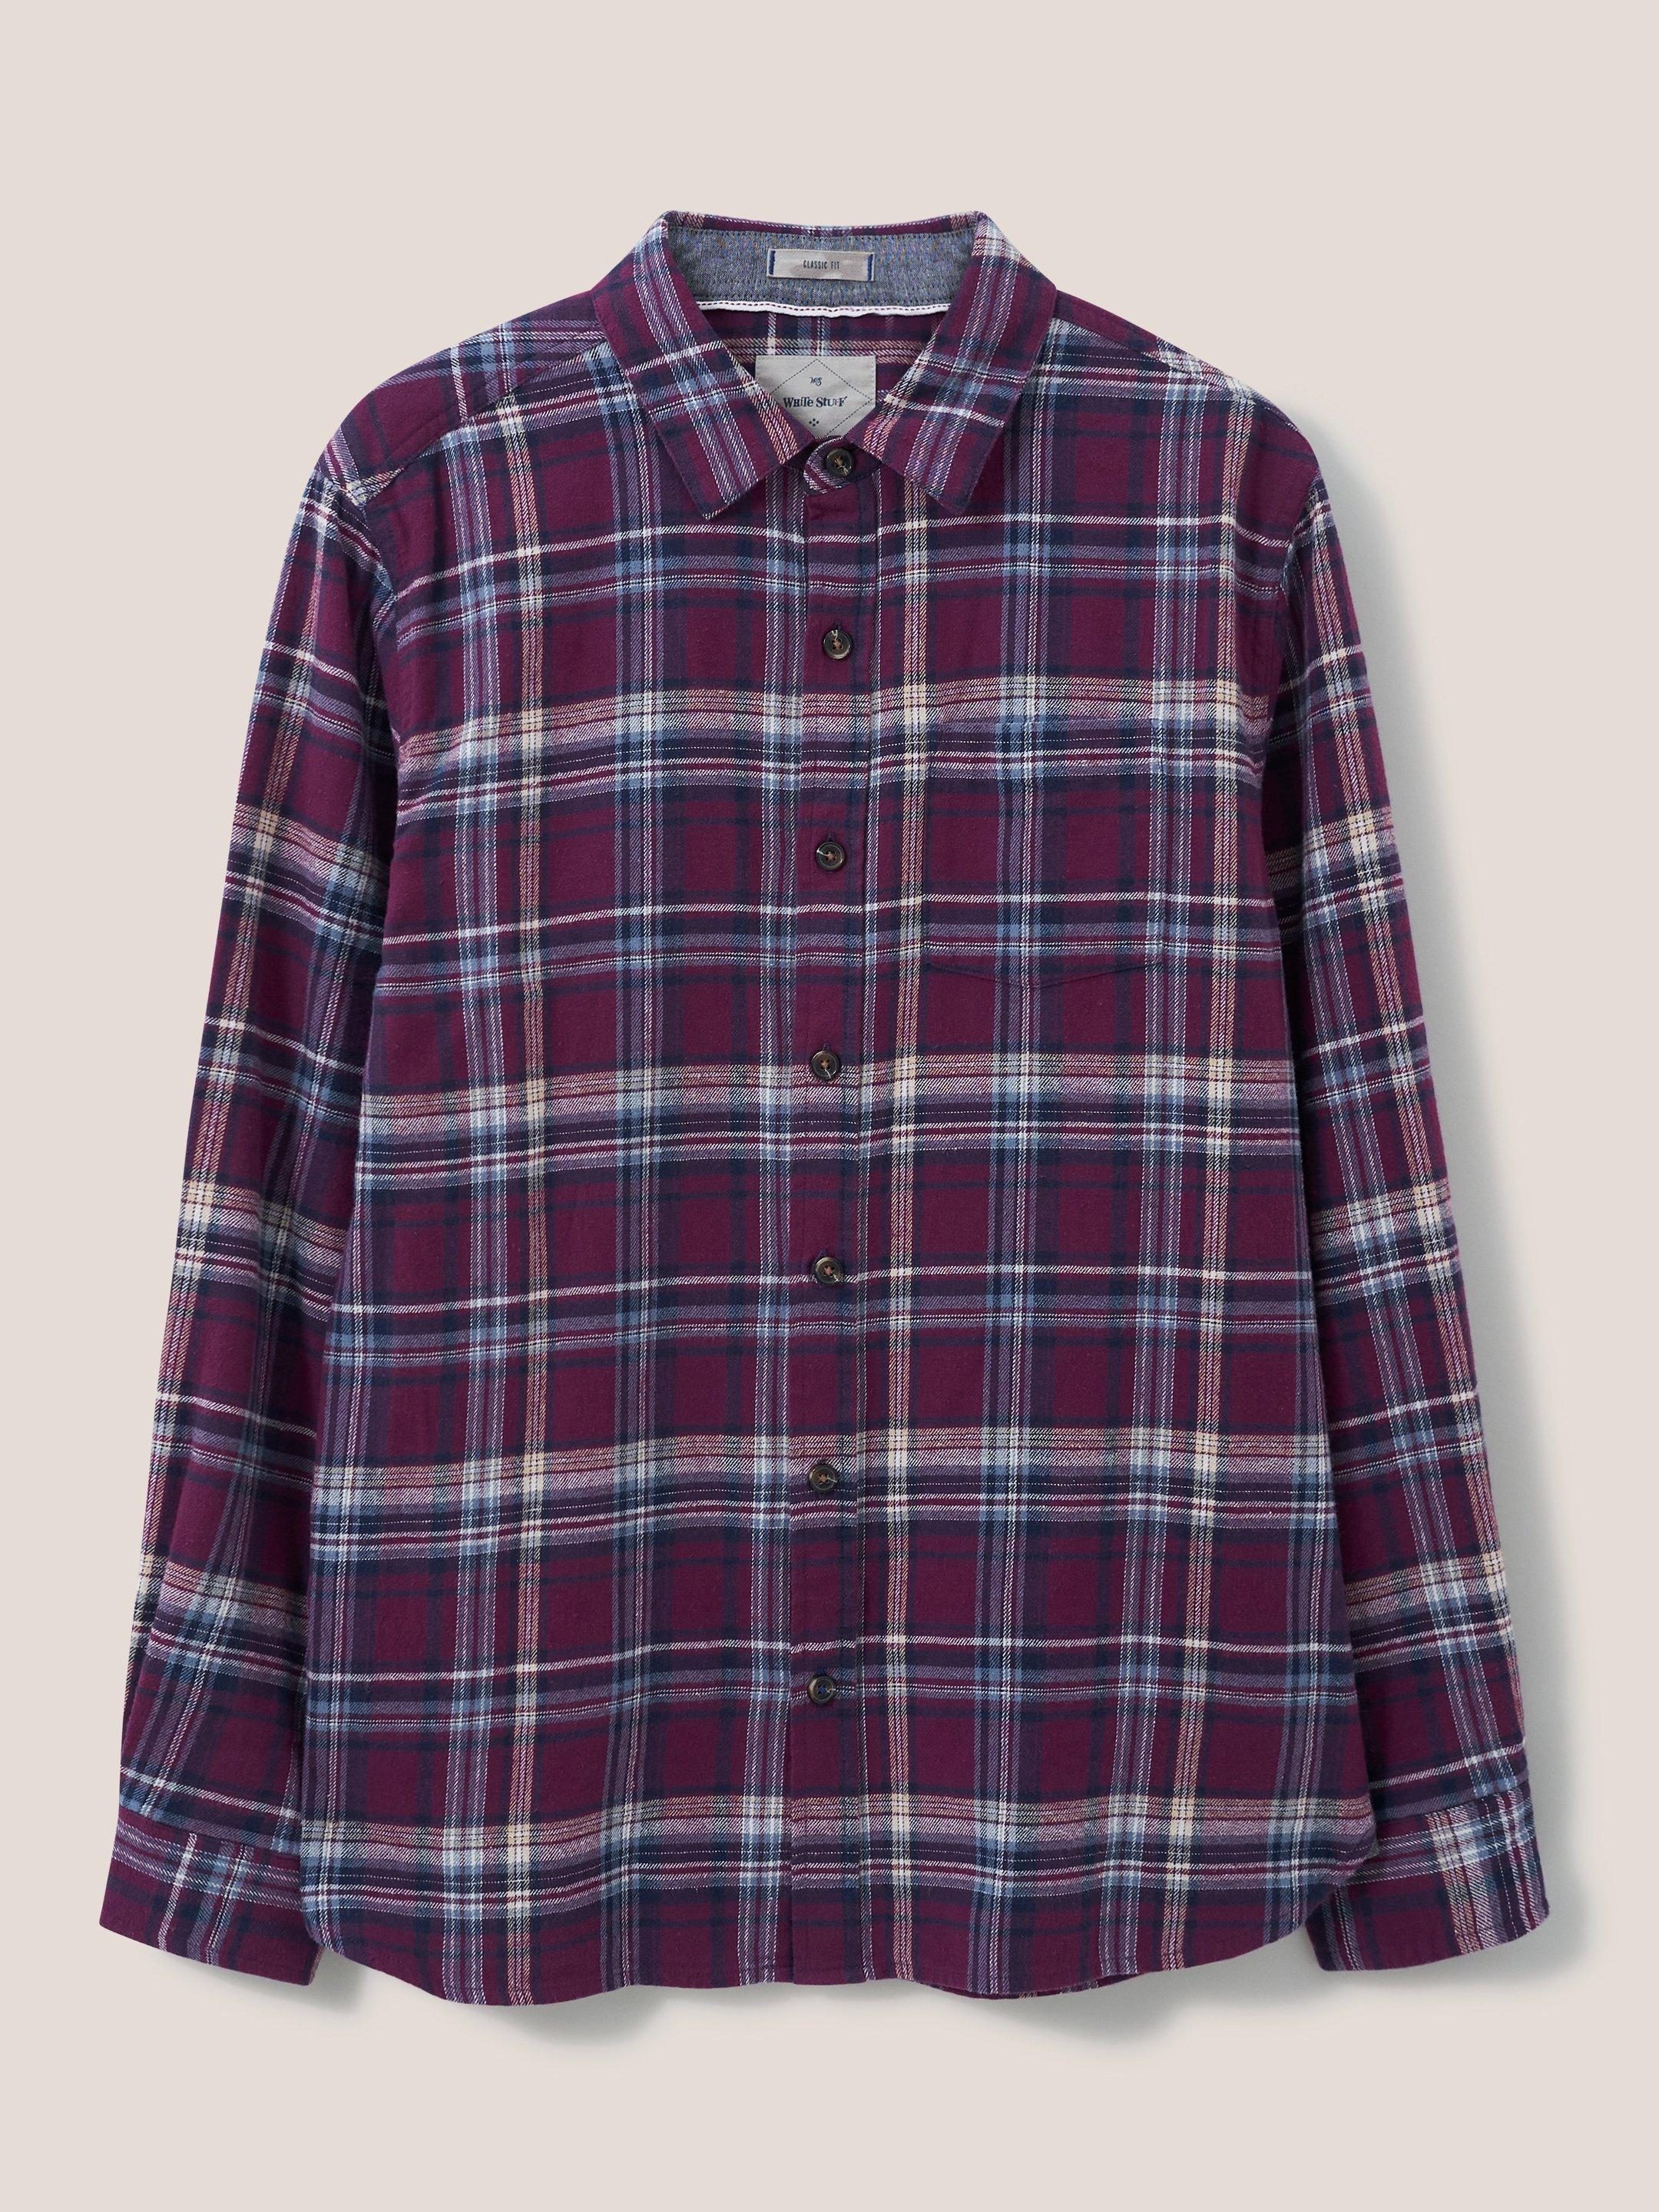 Moxley Flannel Check Shirt in MID PLUM - FLAT FRONT